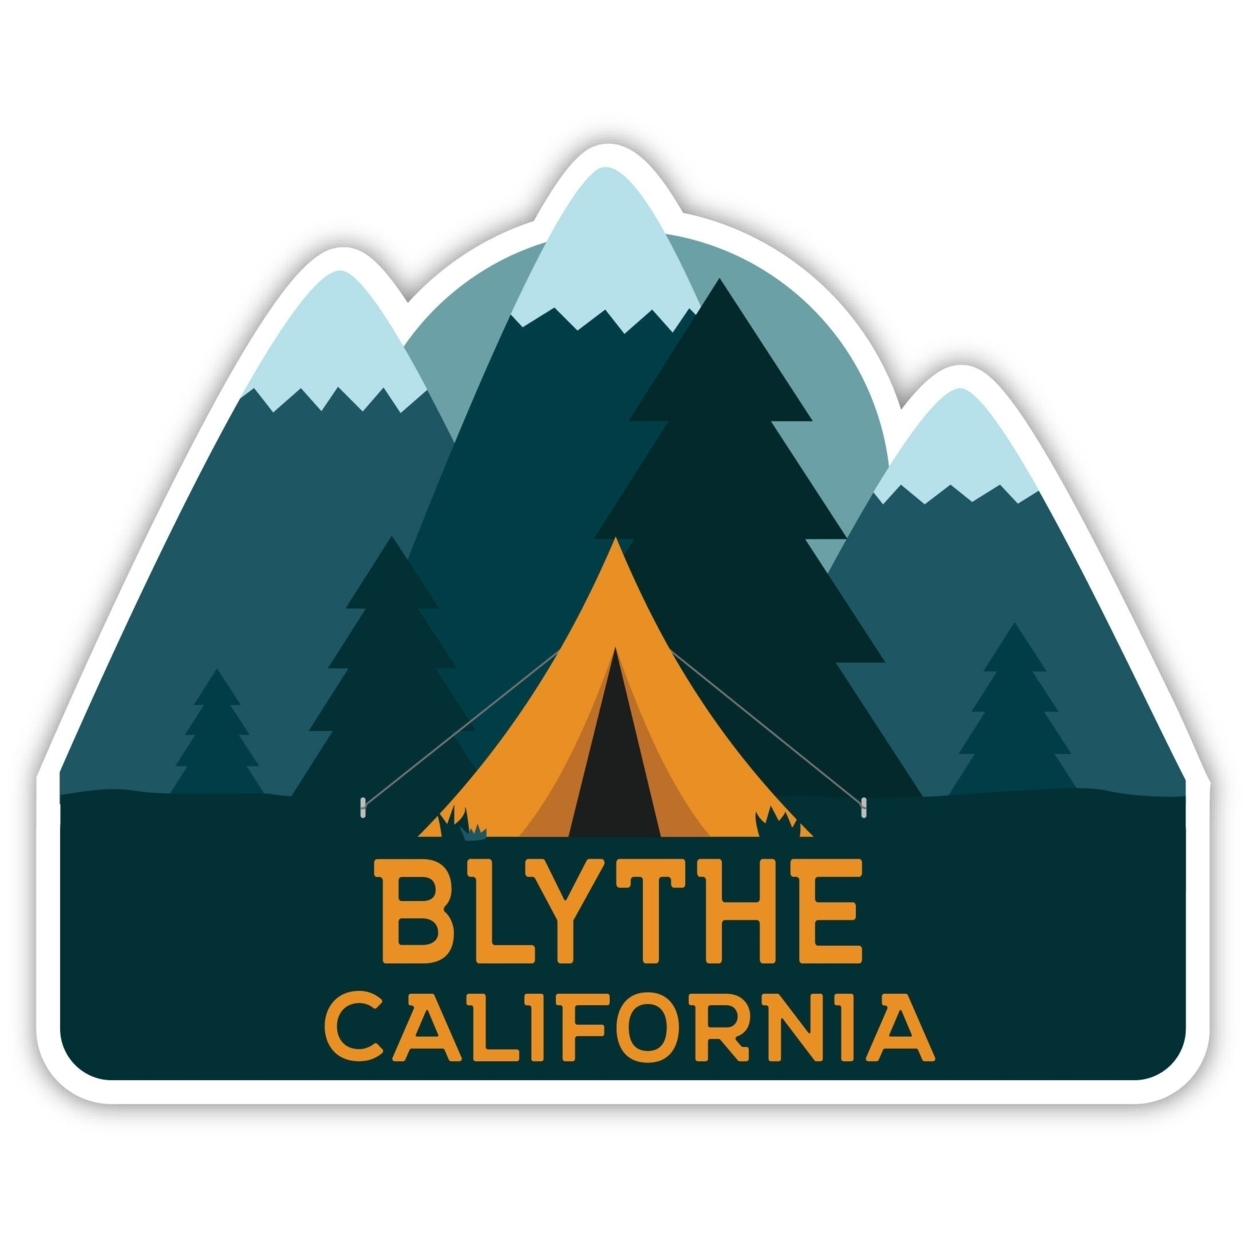 Blythe California Souvenir Decorative Stickers (Choose Theme And Size) - 4-Pack, 4-Inch, Tent